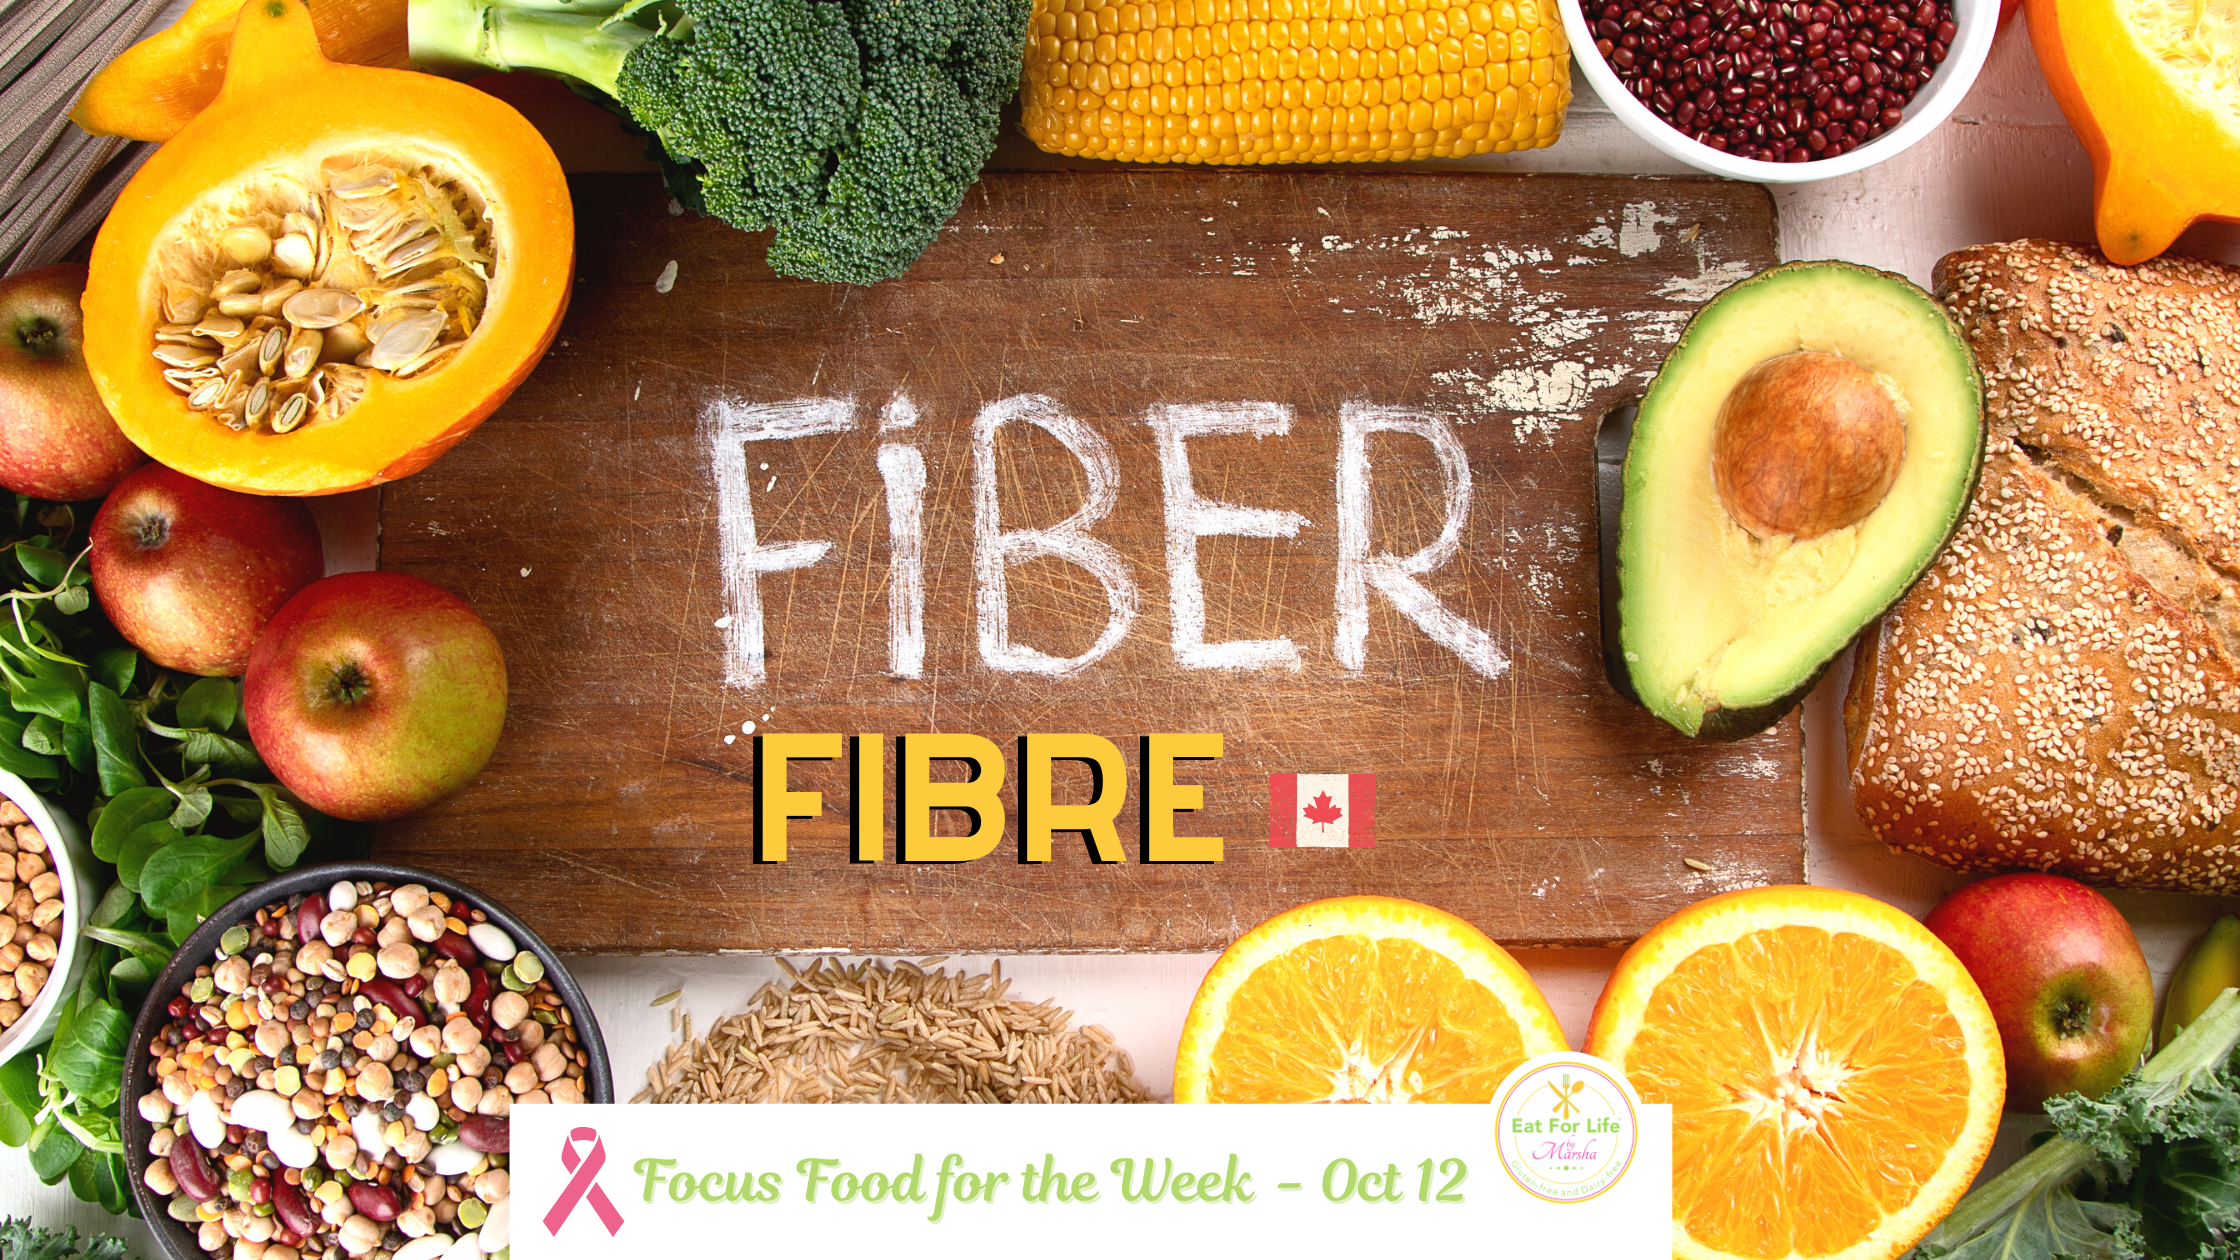 Fibre - Focus Food for the week of October 12 (Breast Cancer Awareness Month)